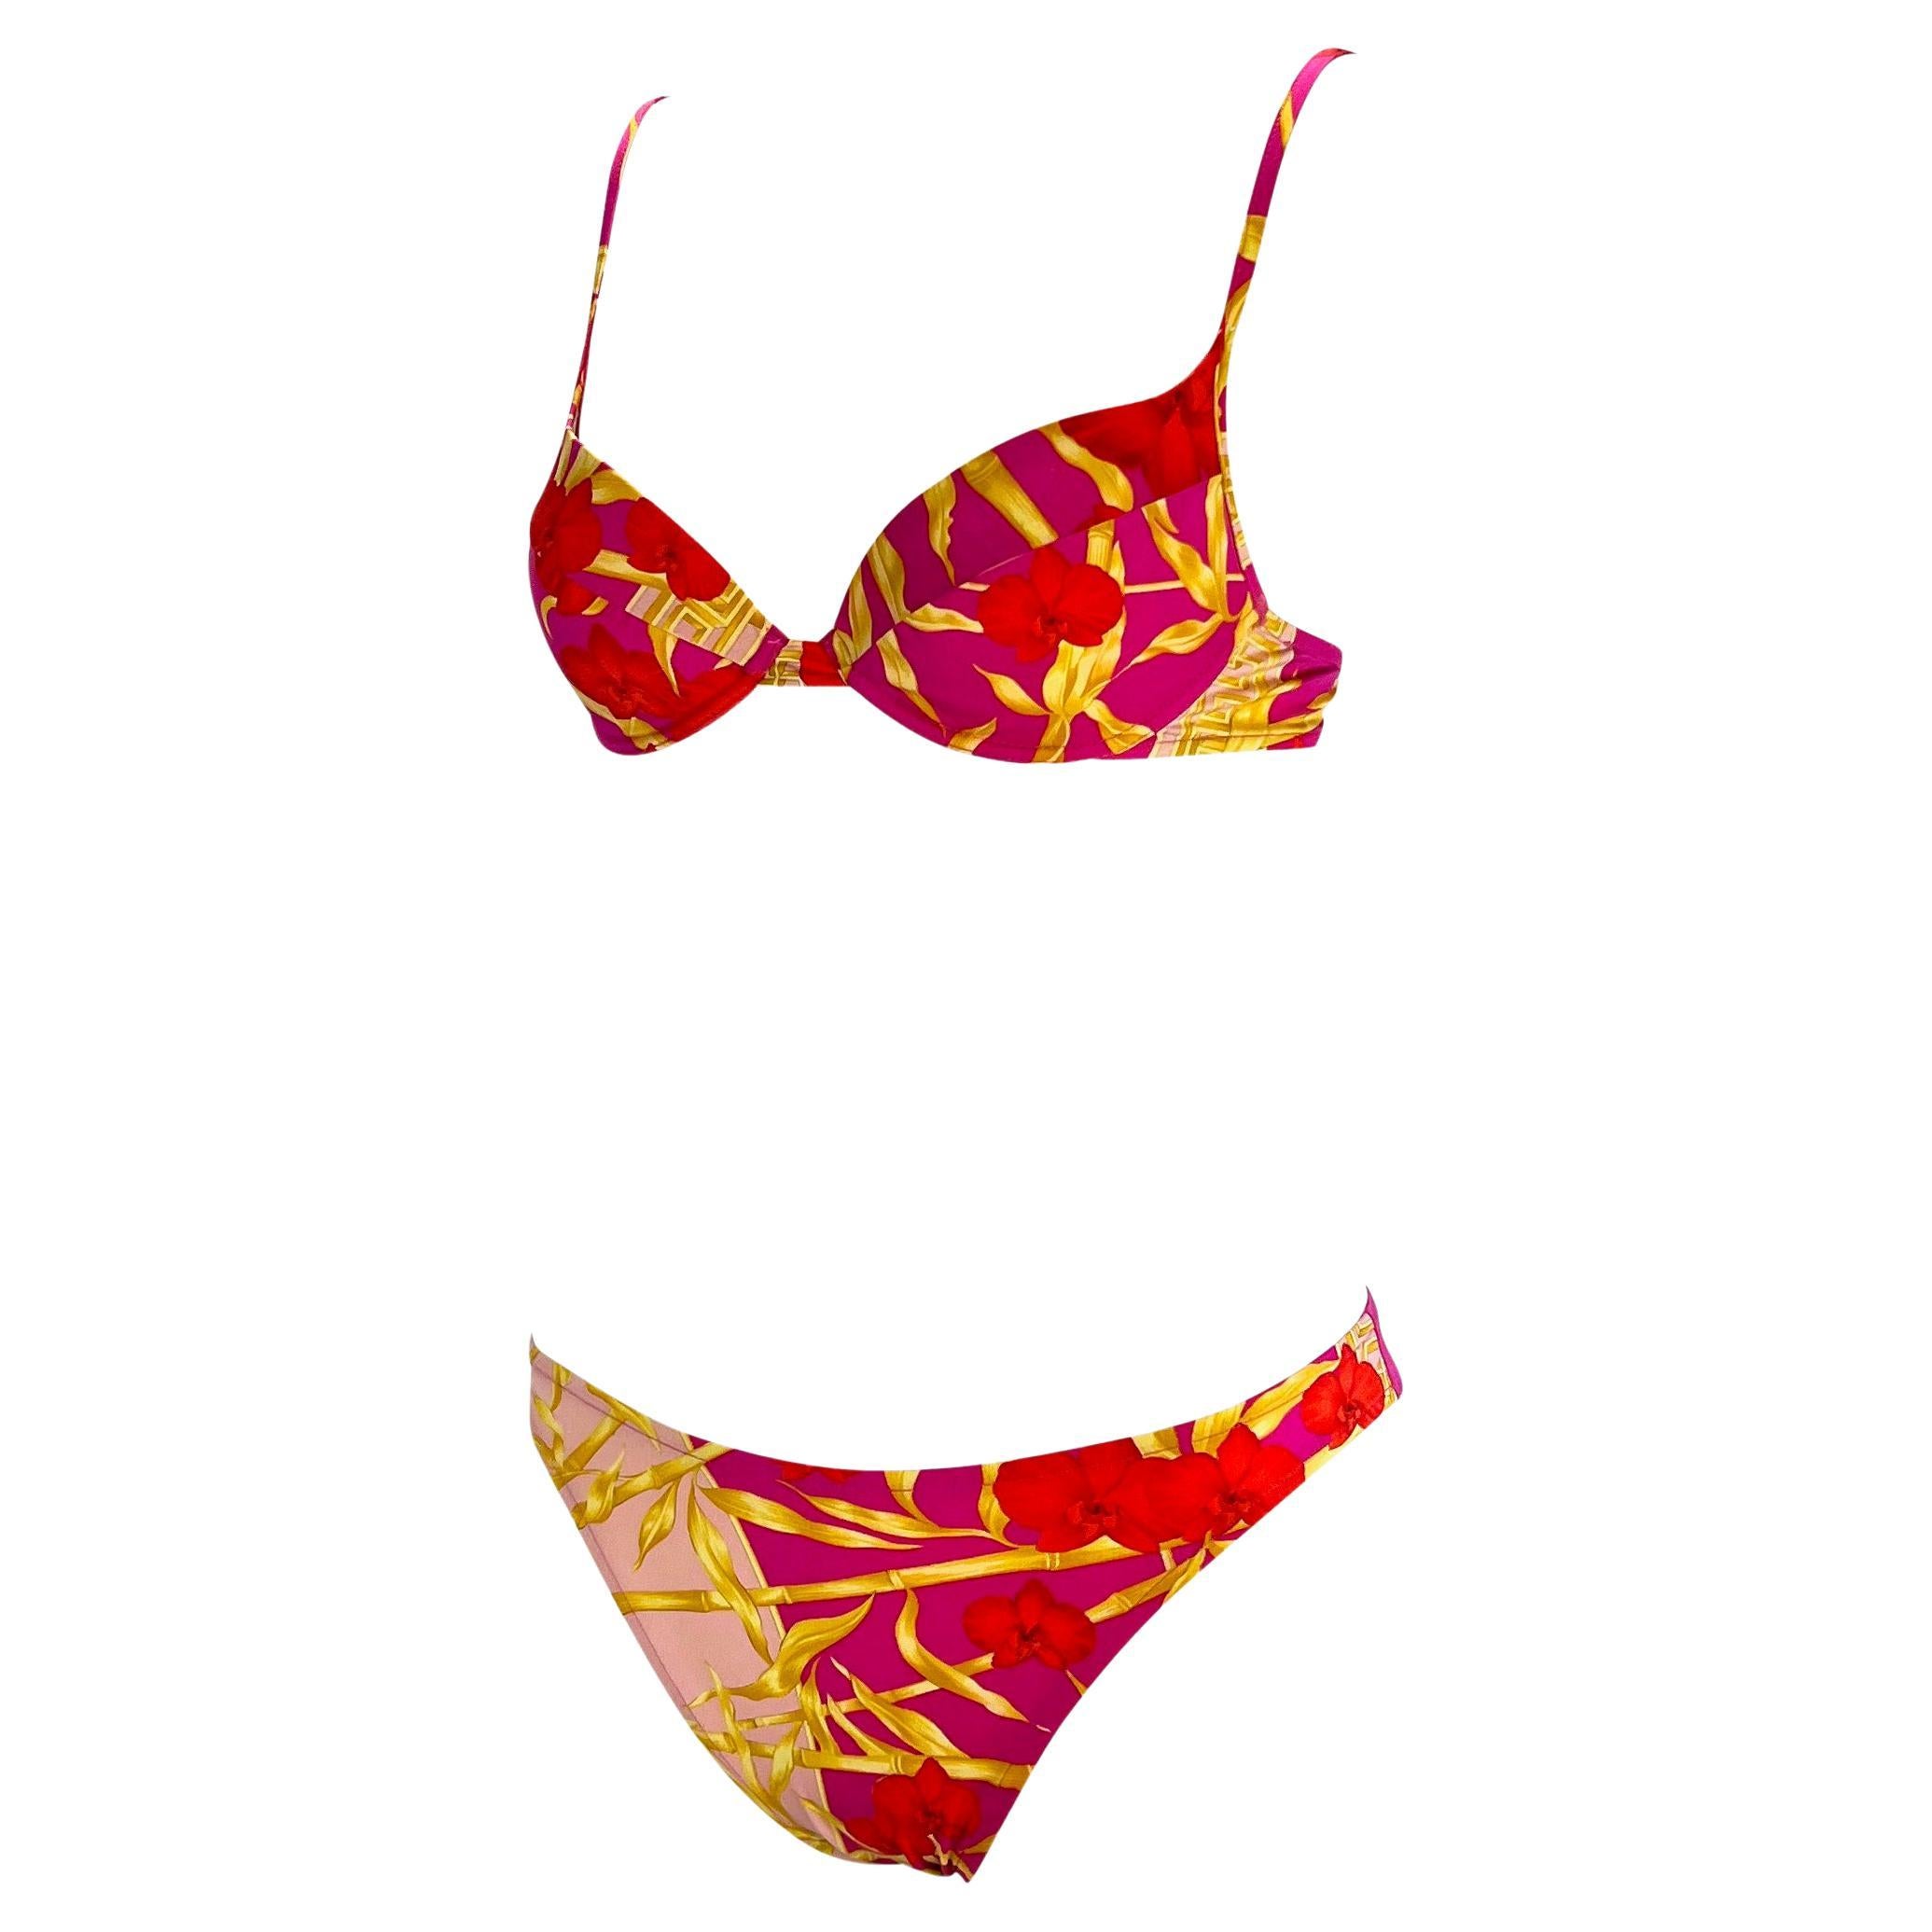 Presenting a pink orchid jungle print Gianni Versace bikini, designed by Donatella Versace. From the Spring/Summer 2000 collection, this bikini boasts a vibrant pink jungle print akin to the green one famously worn by JLo. This bikini set is